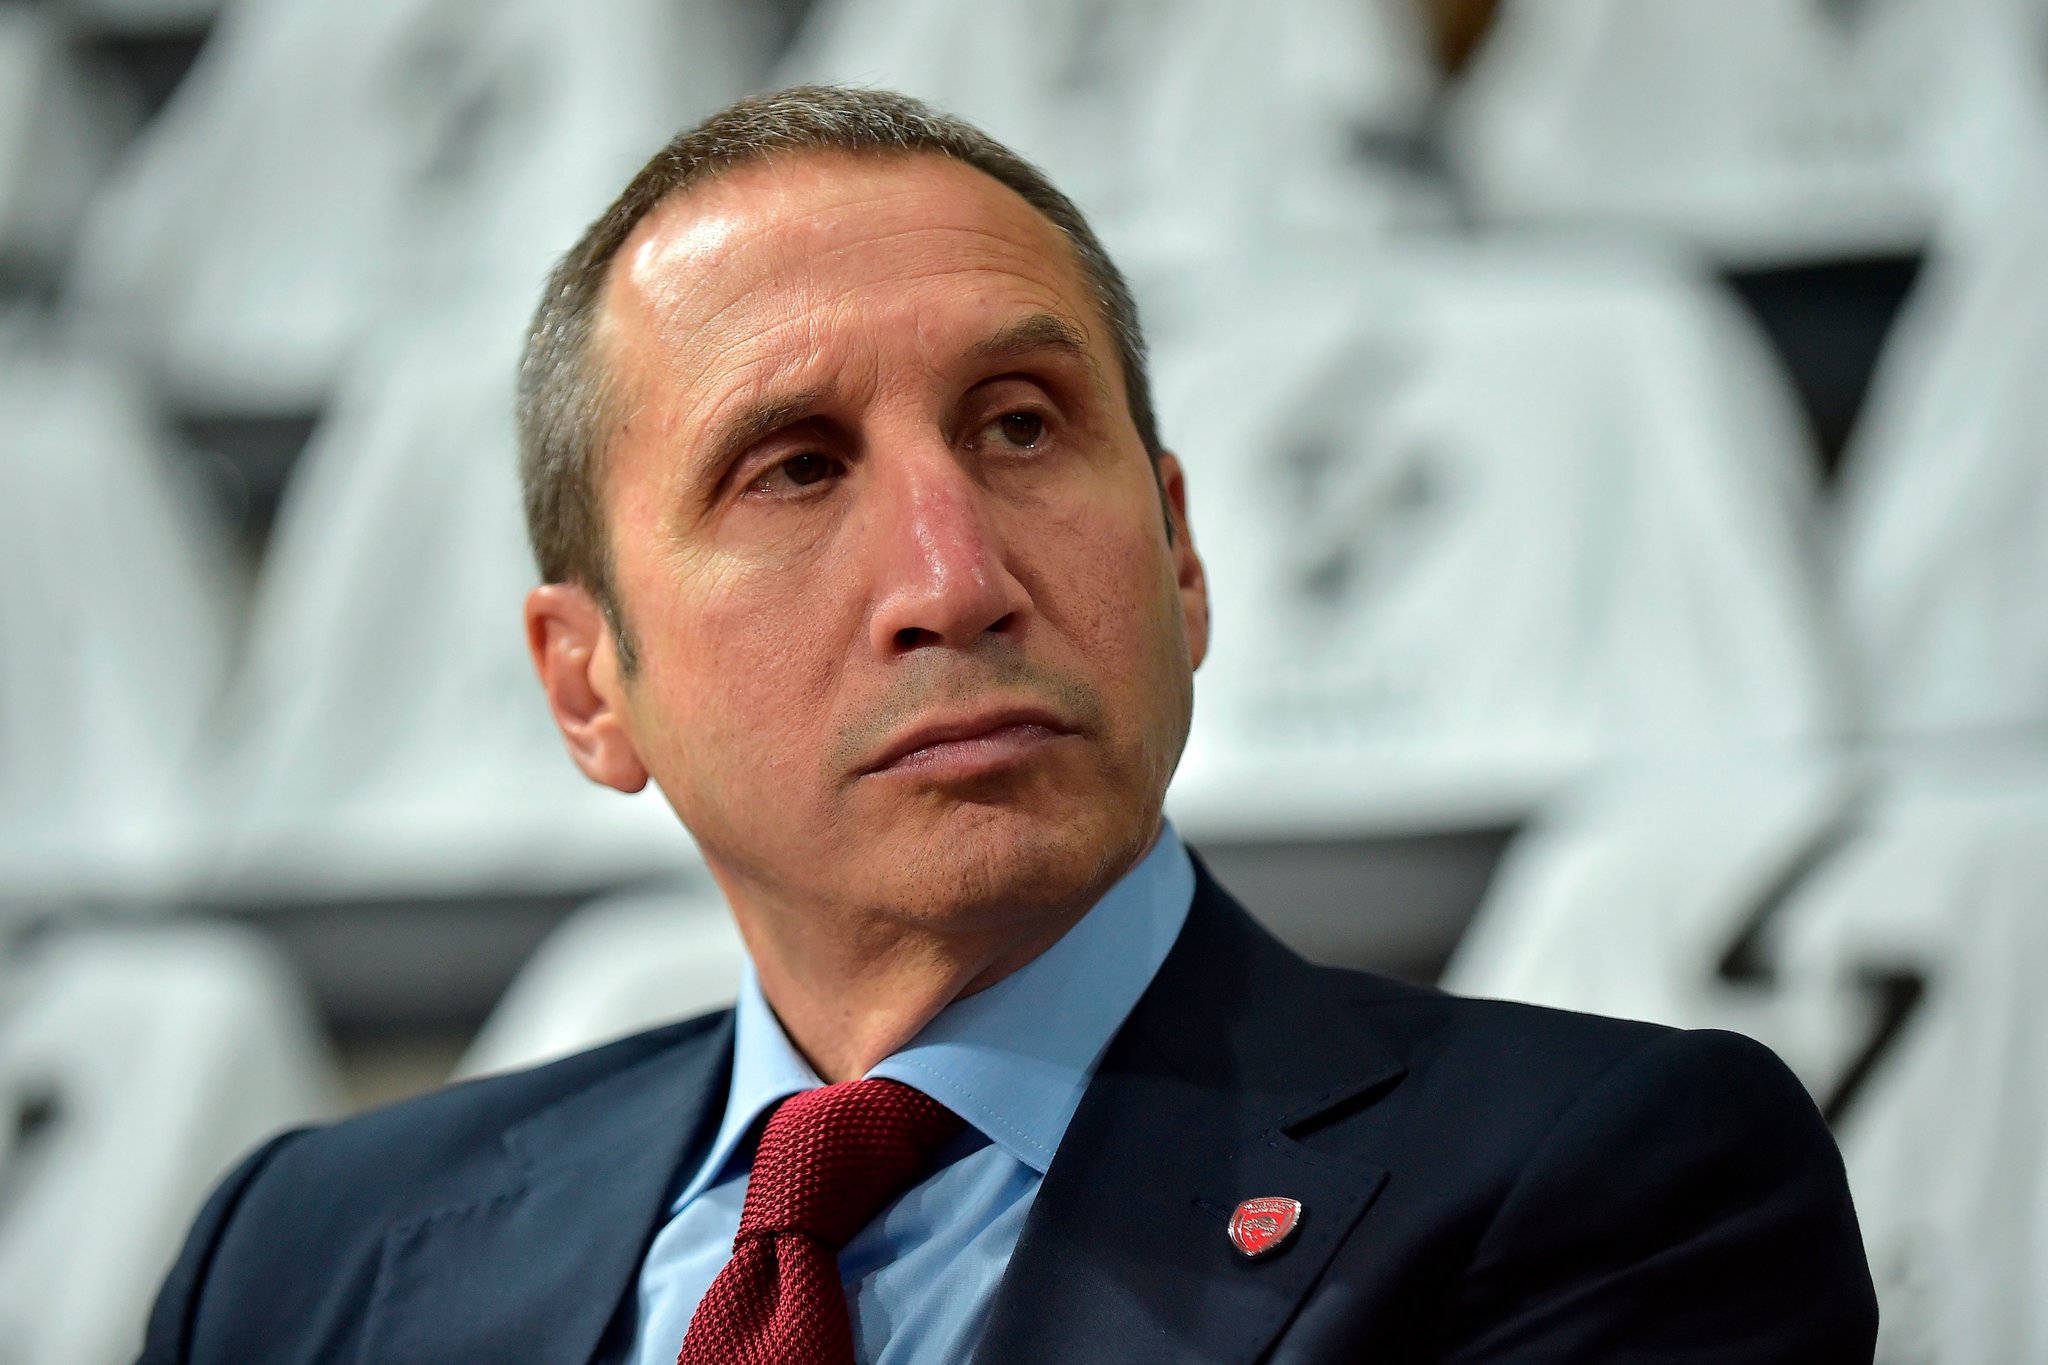 25 Enigmatic Facts About David Blatt - Facts.net